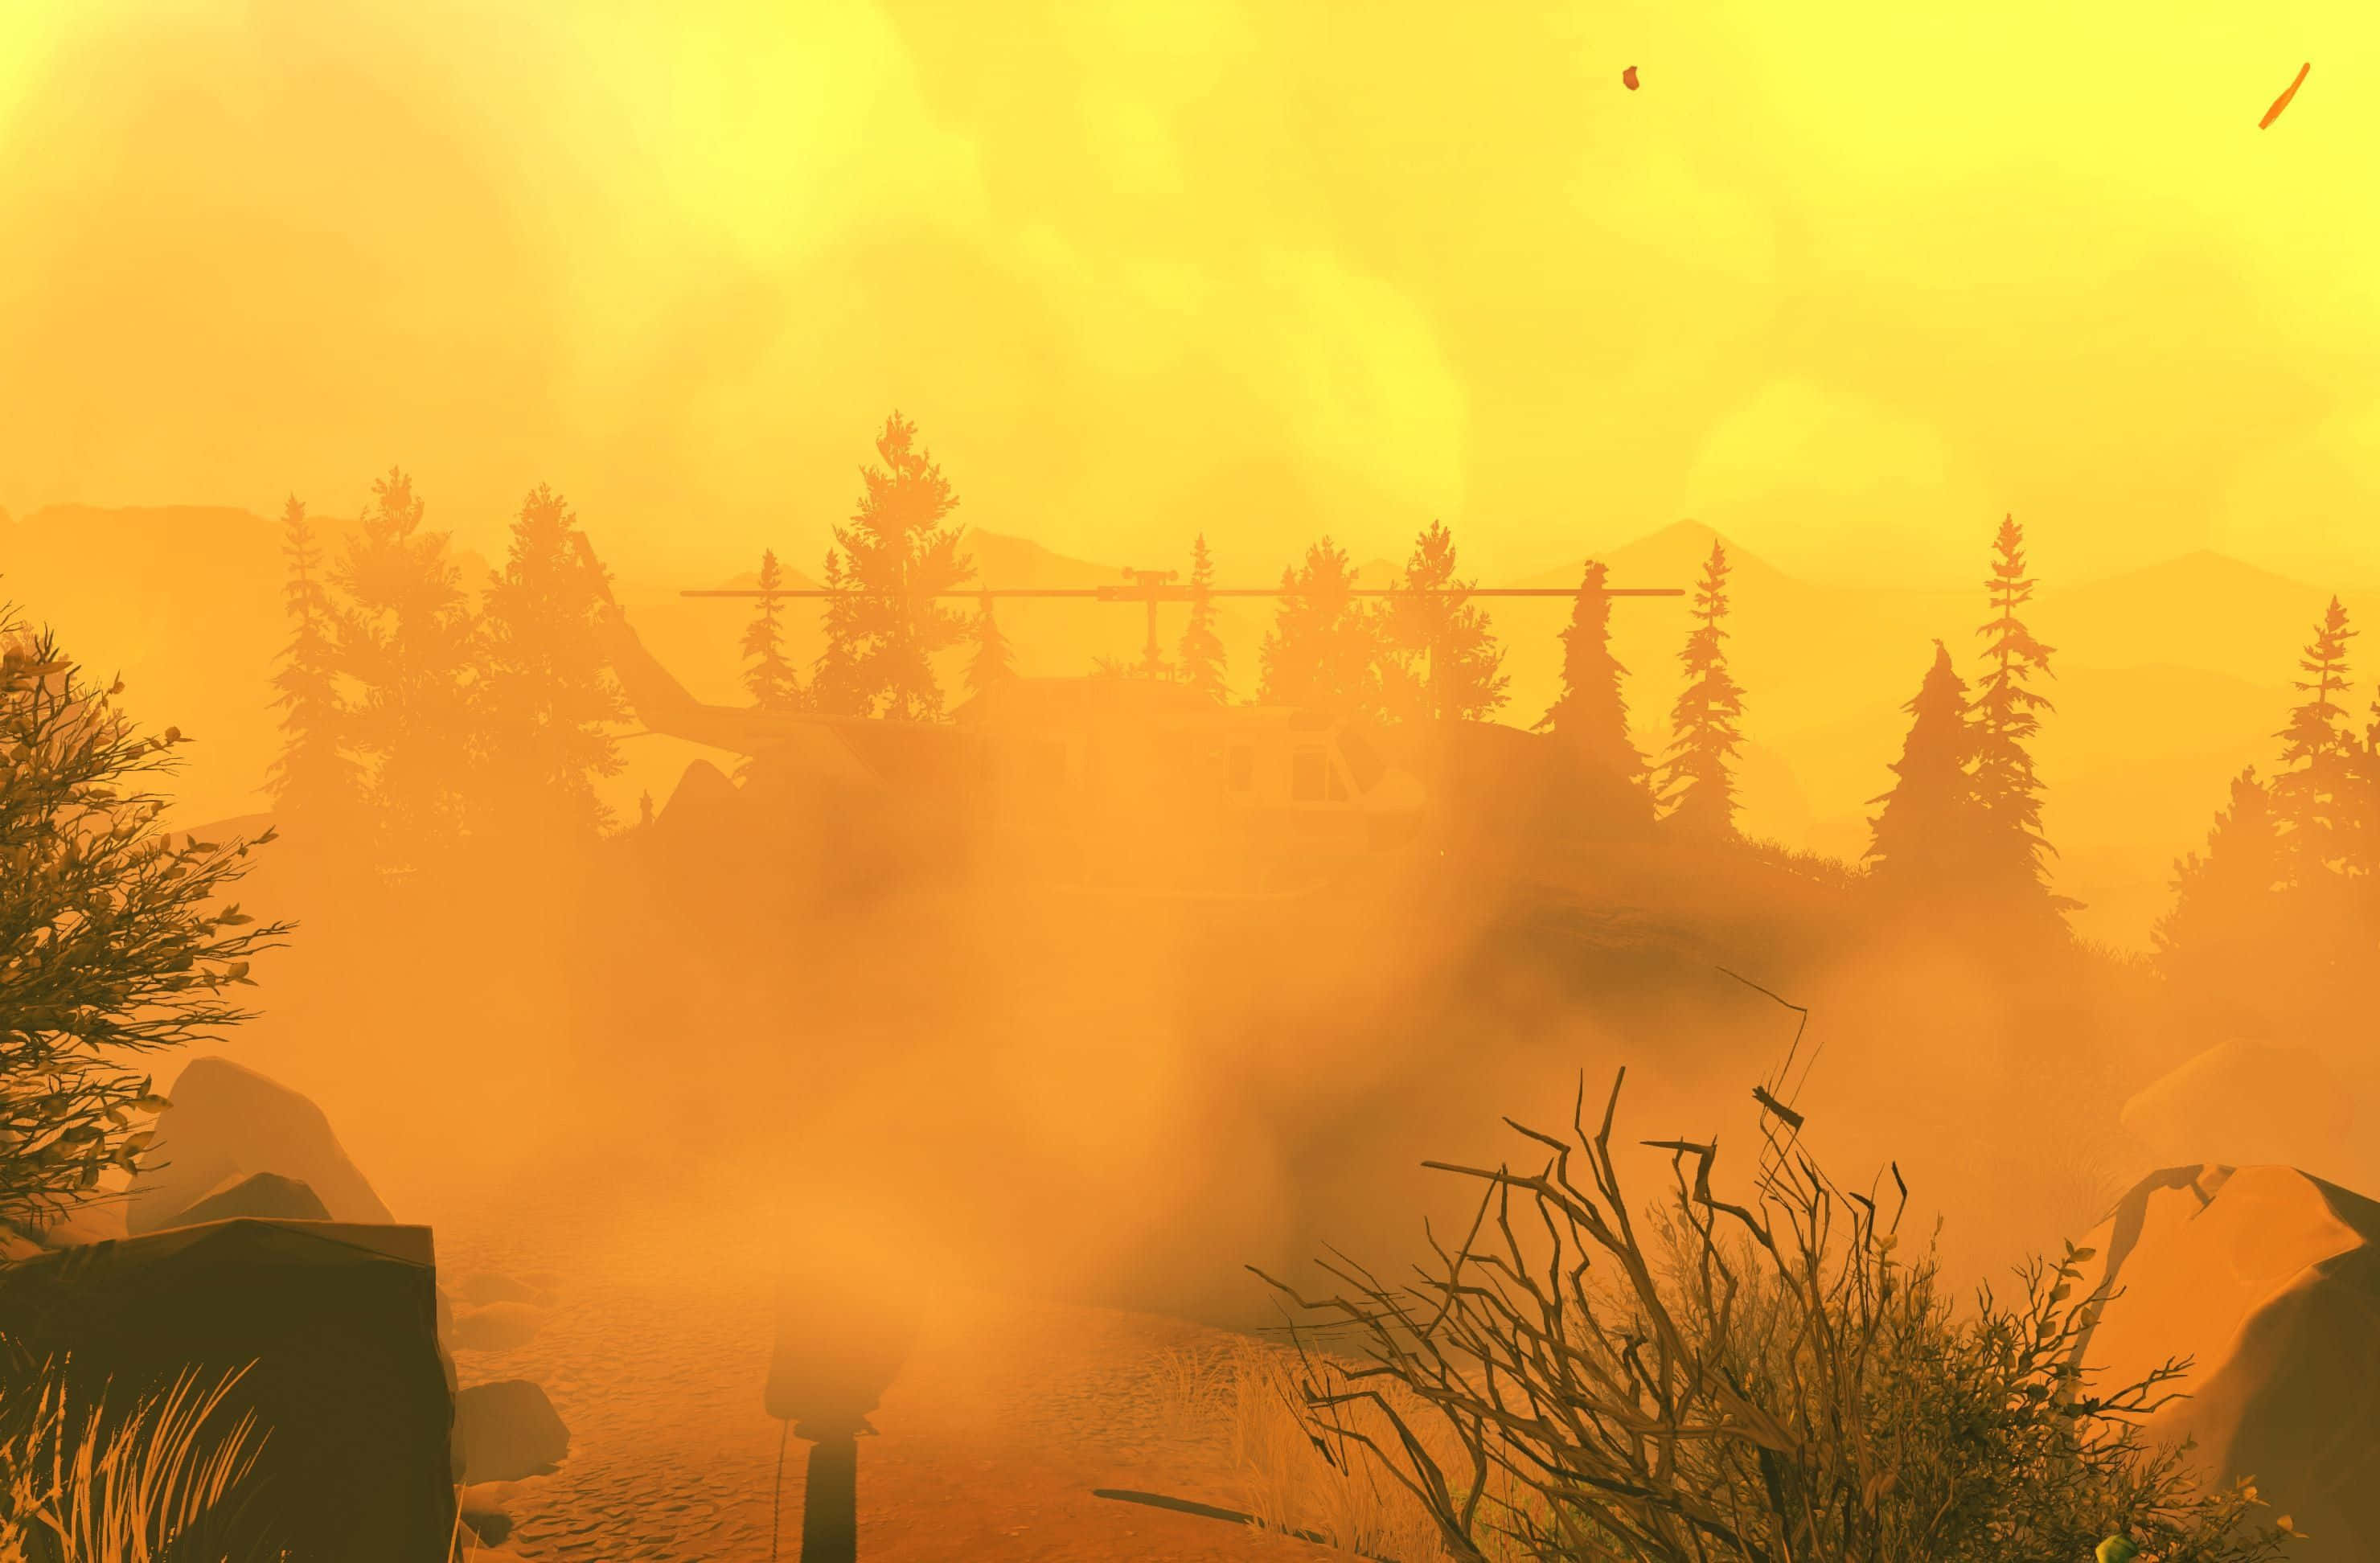 A view of Firewatch, a natural refuge away from the rest of the world.